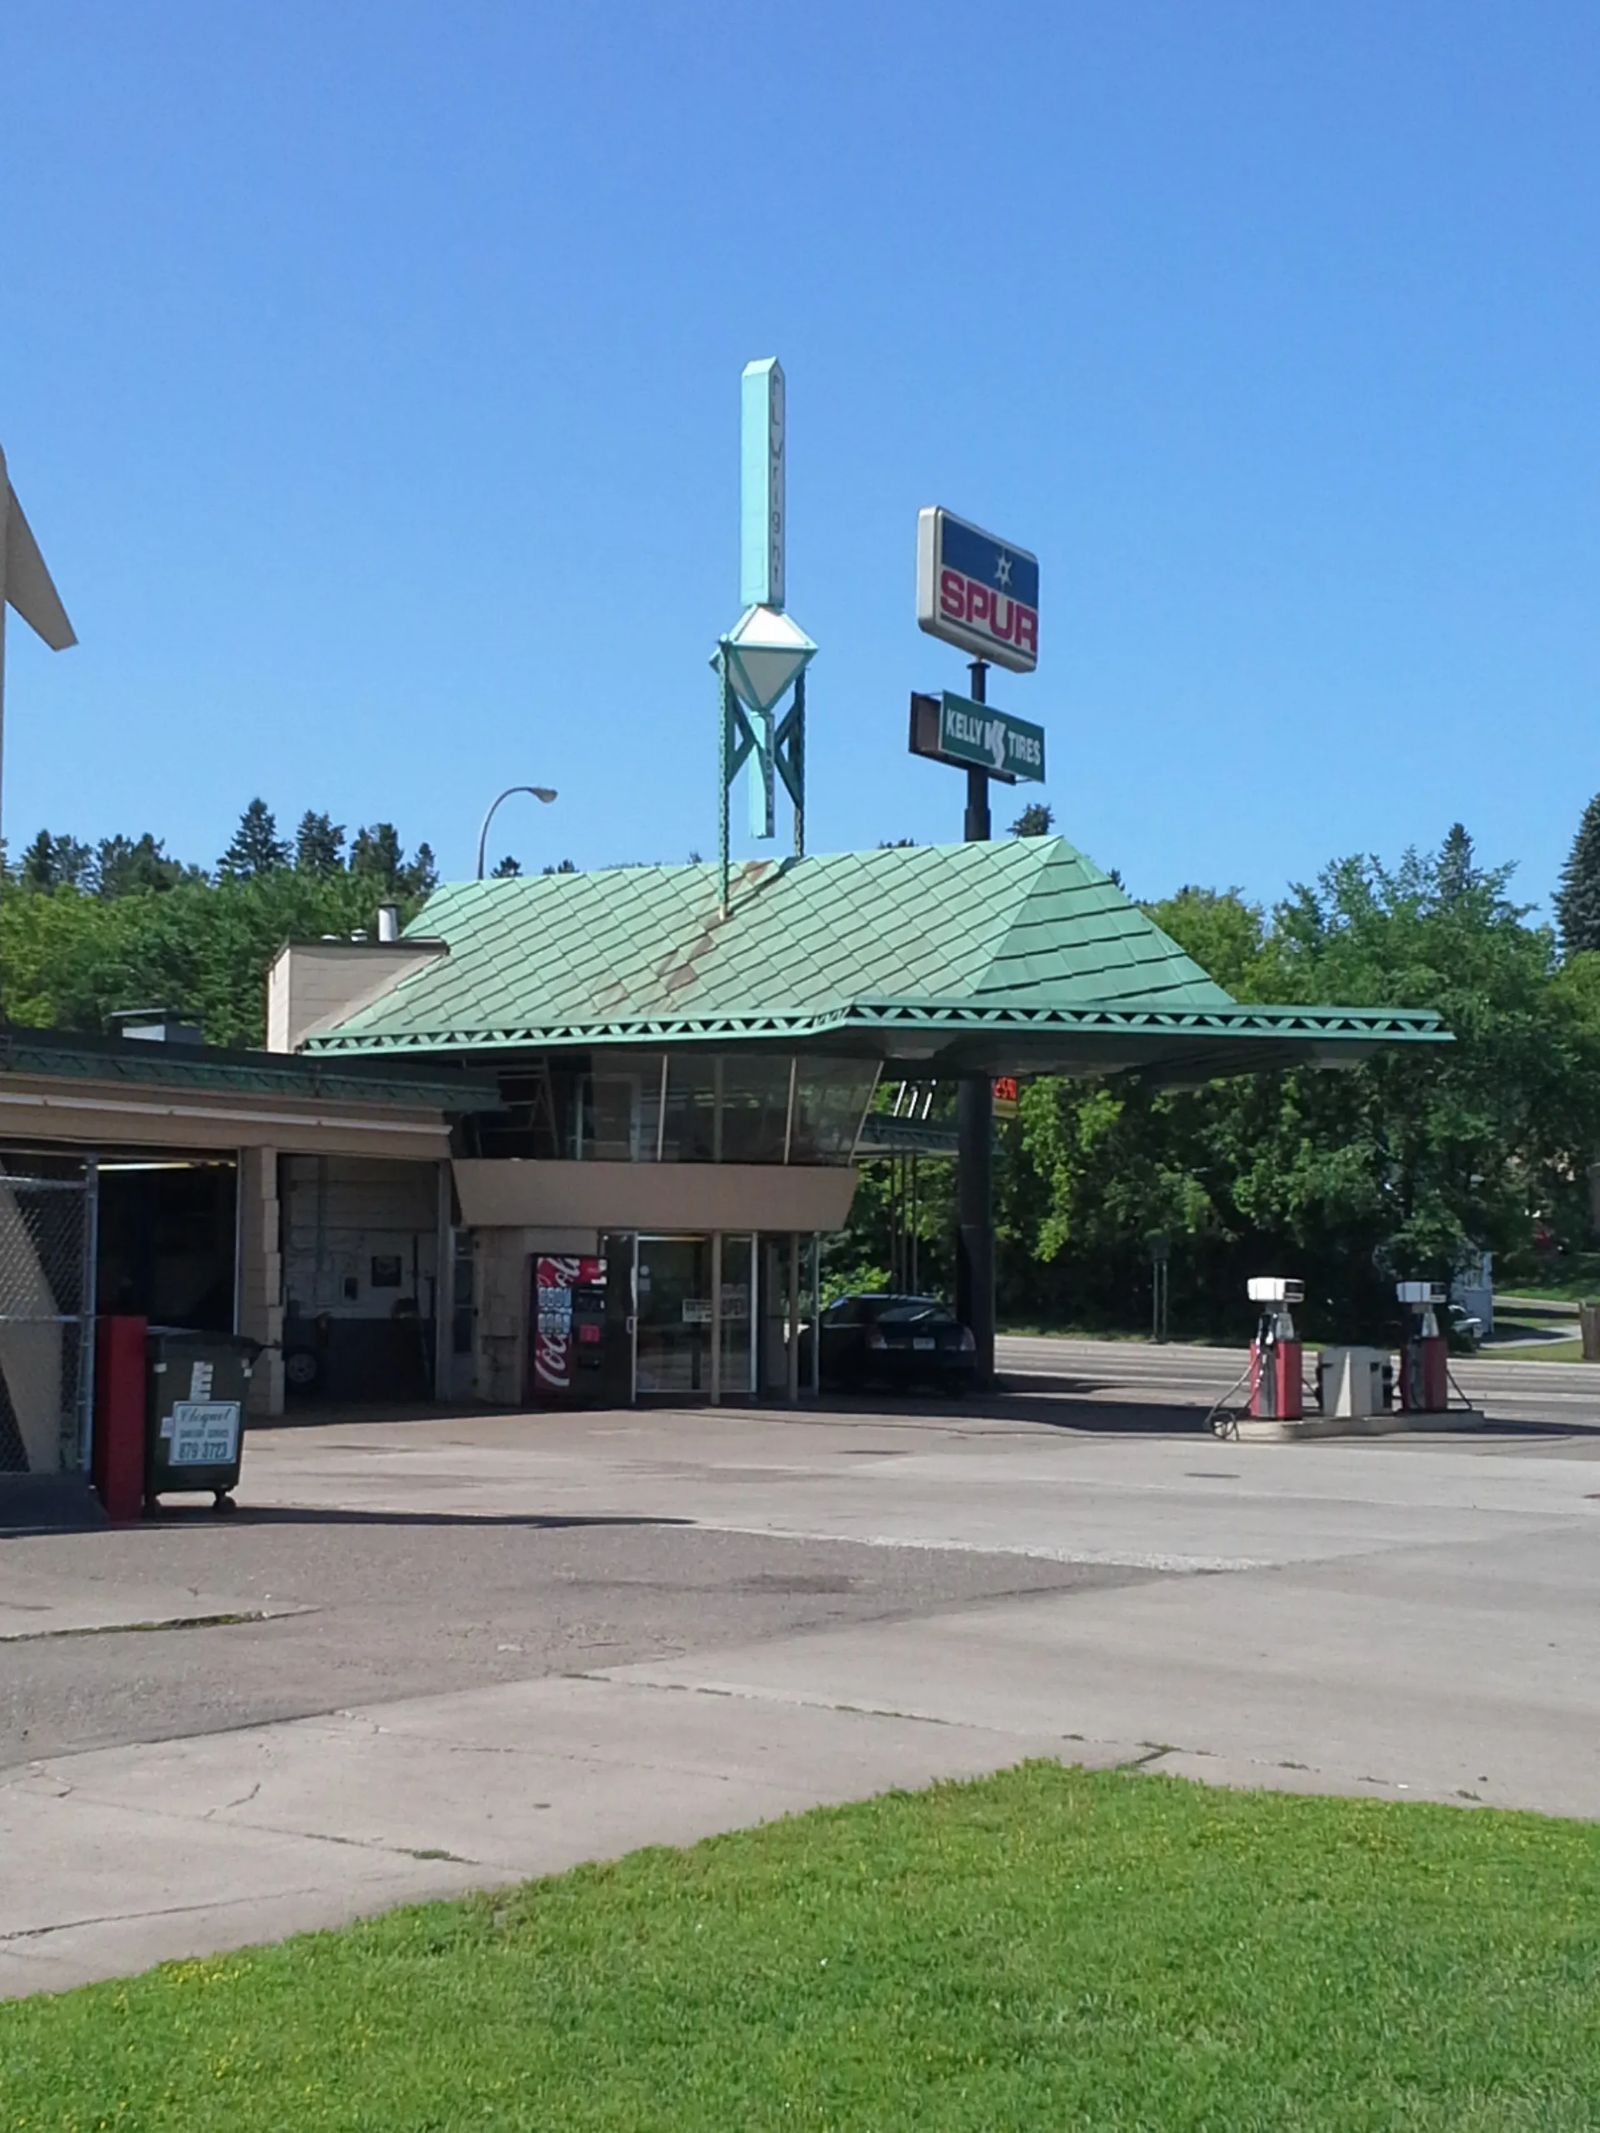 Photo of gas station designed by Frank Lloyd Wright in Cloquet, Minnesota